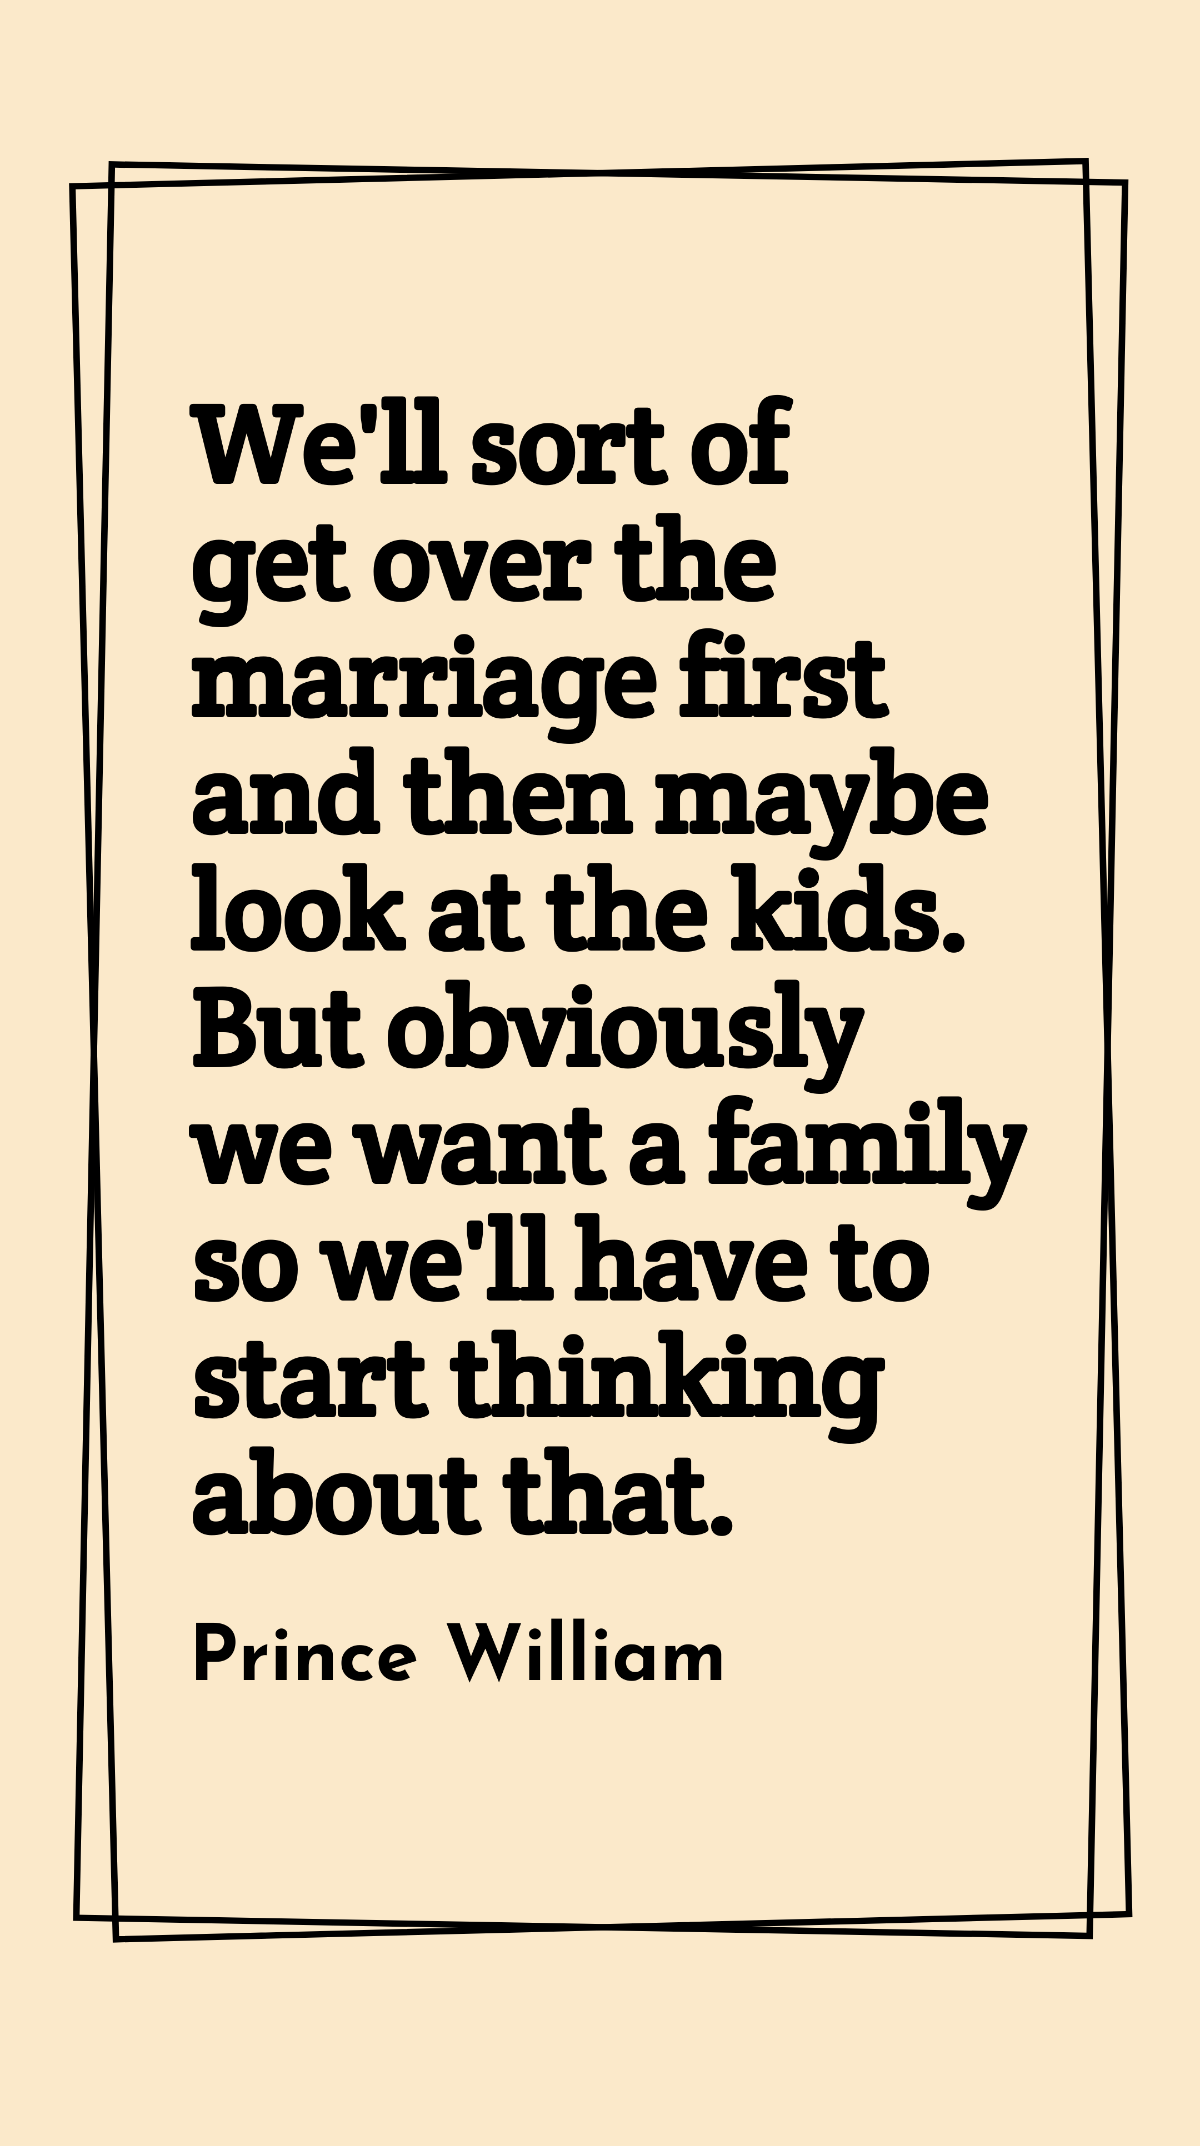 Free Prince William - We'll sort of get over the marriage first and then maybe look at the kids. But obviously we want a family so we'll have to start thinking about that. Template